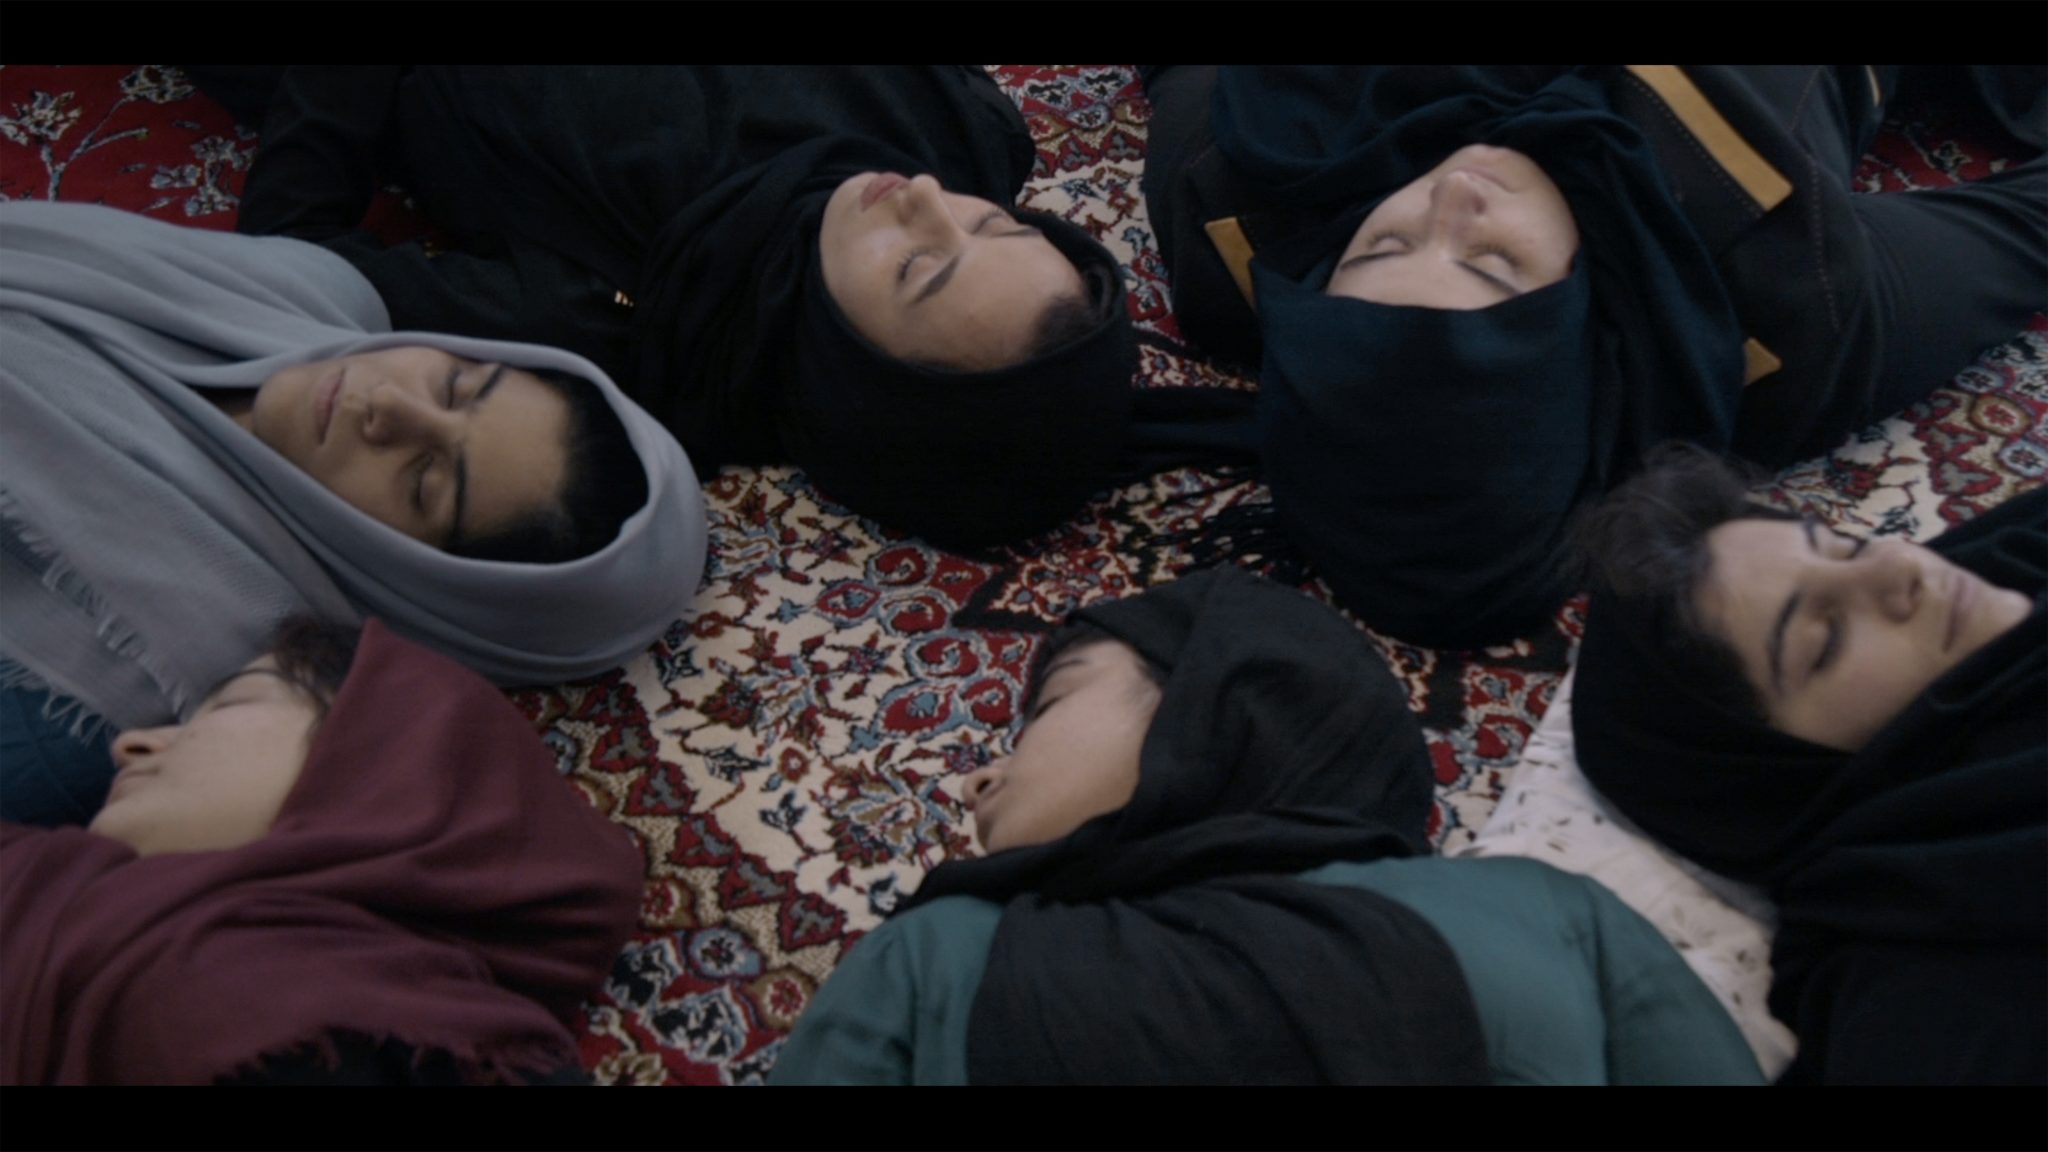 Girls in Iranian filmmaker Mehrdad Oskouei's Sunless Shadows (2019) which shows a group of girls in a reformatory lying down on a carpet during a meditation session